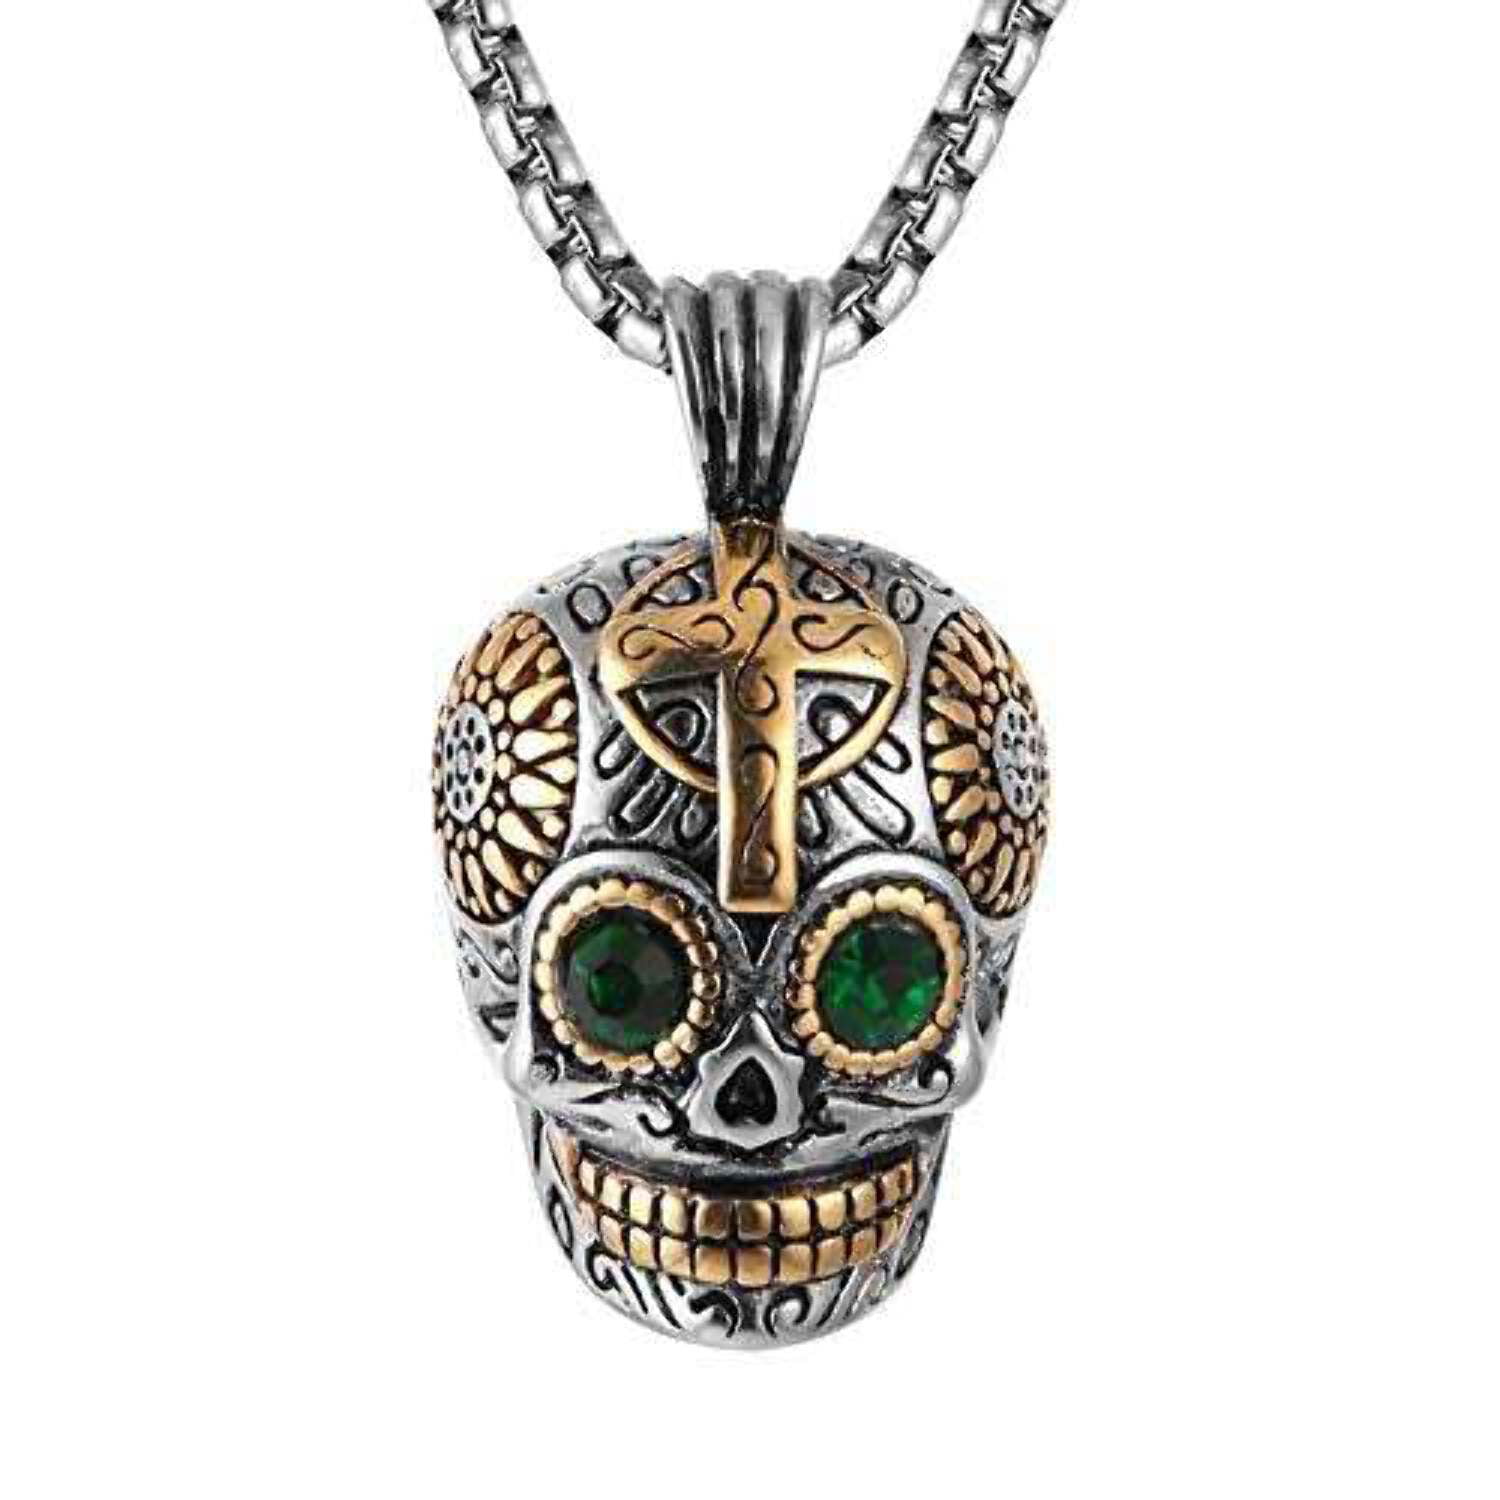 Embroidered Black Lace Gothic Skull Day of the Dead 3.75" Pendant Necklace 